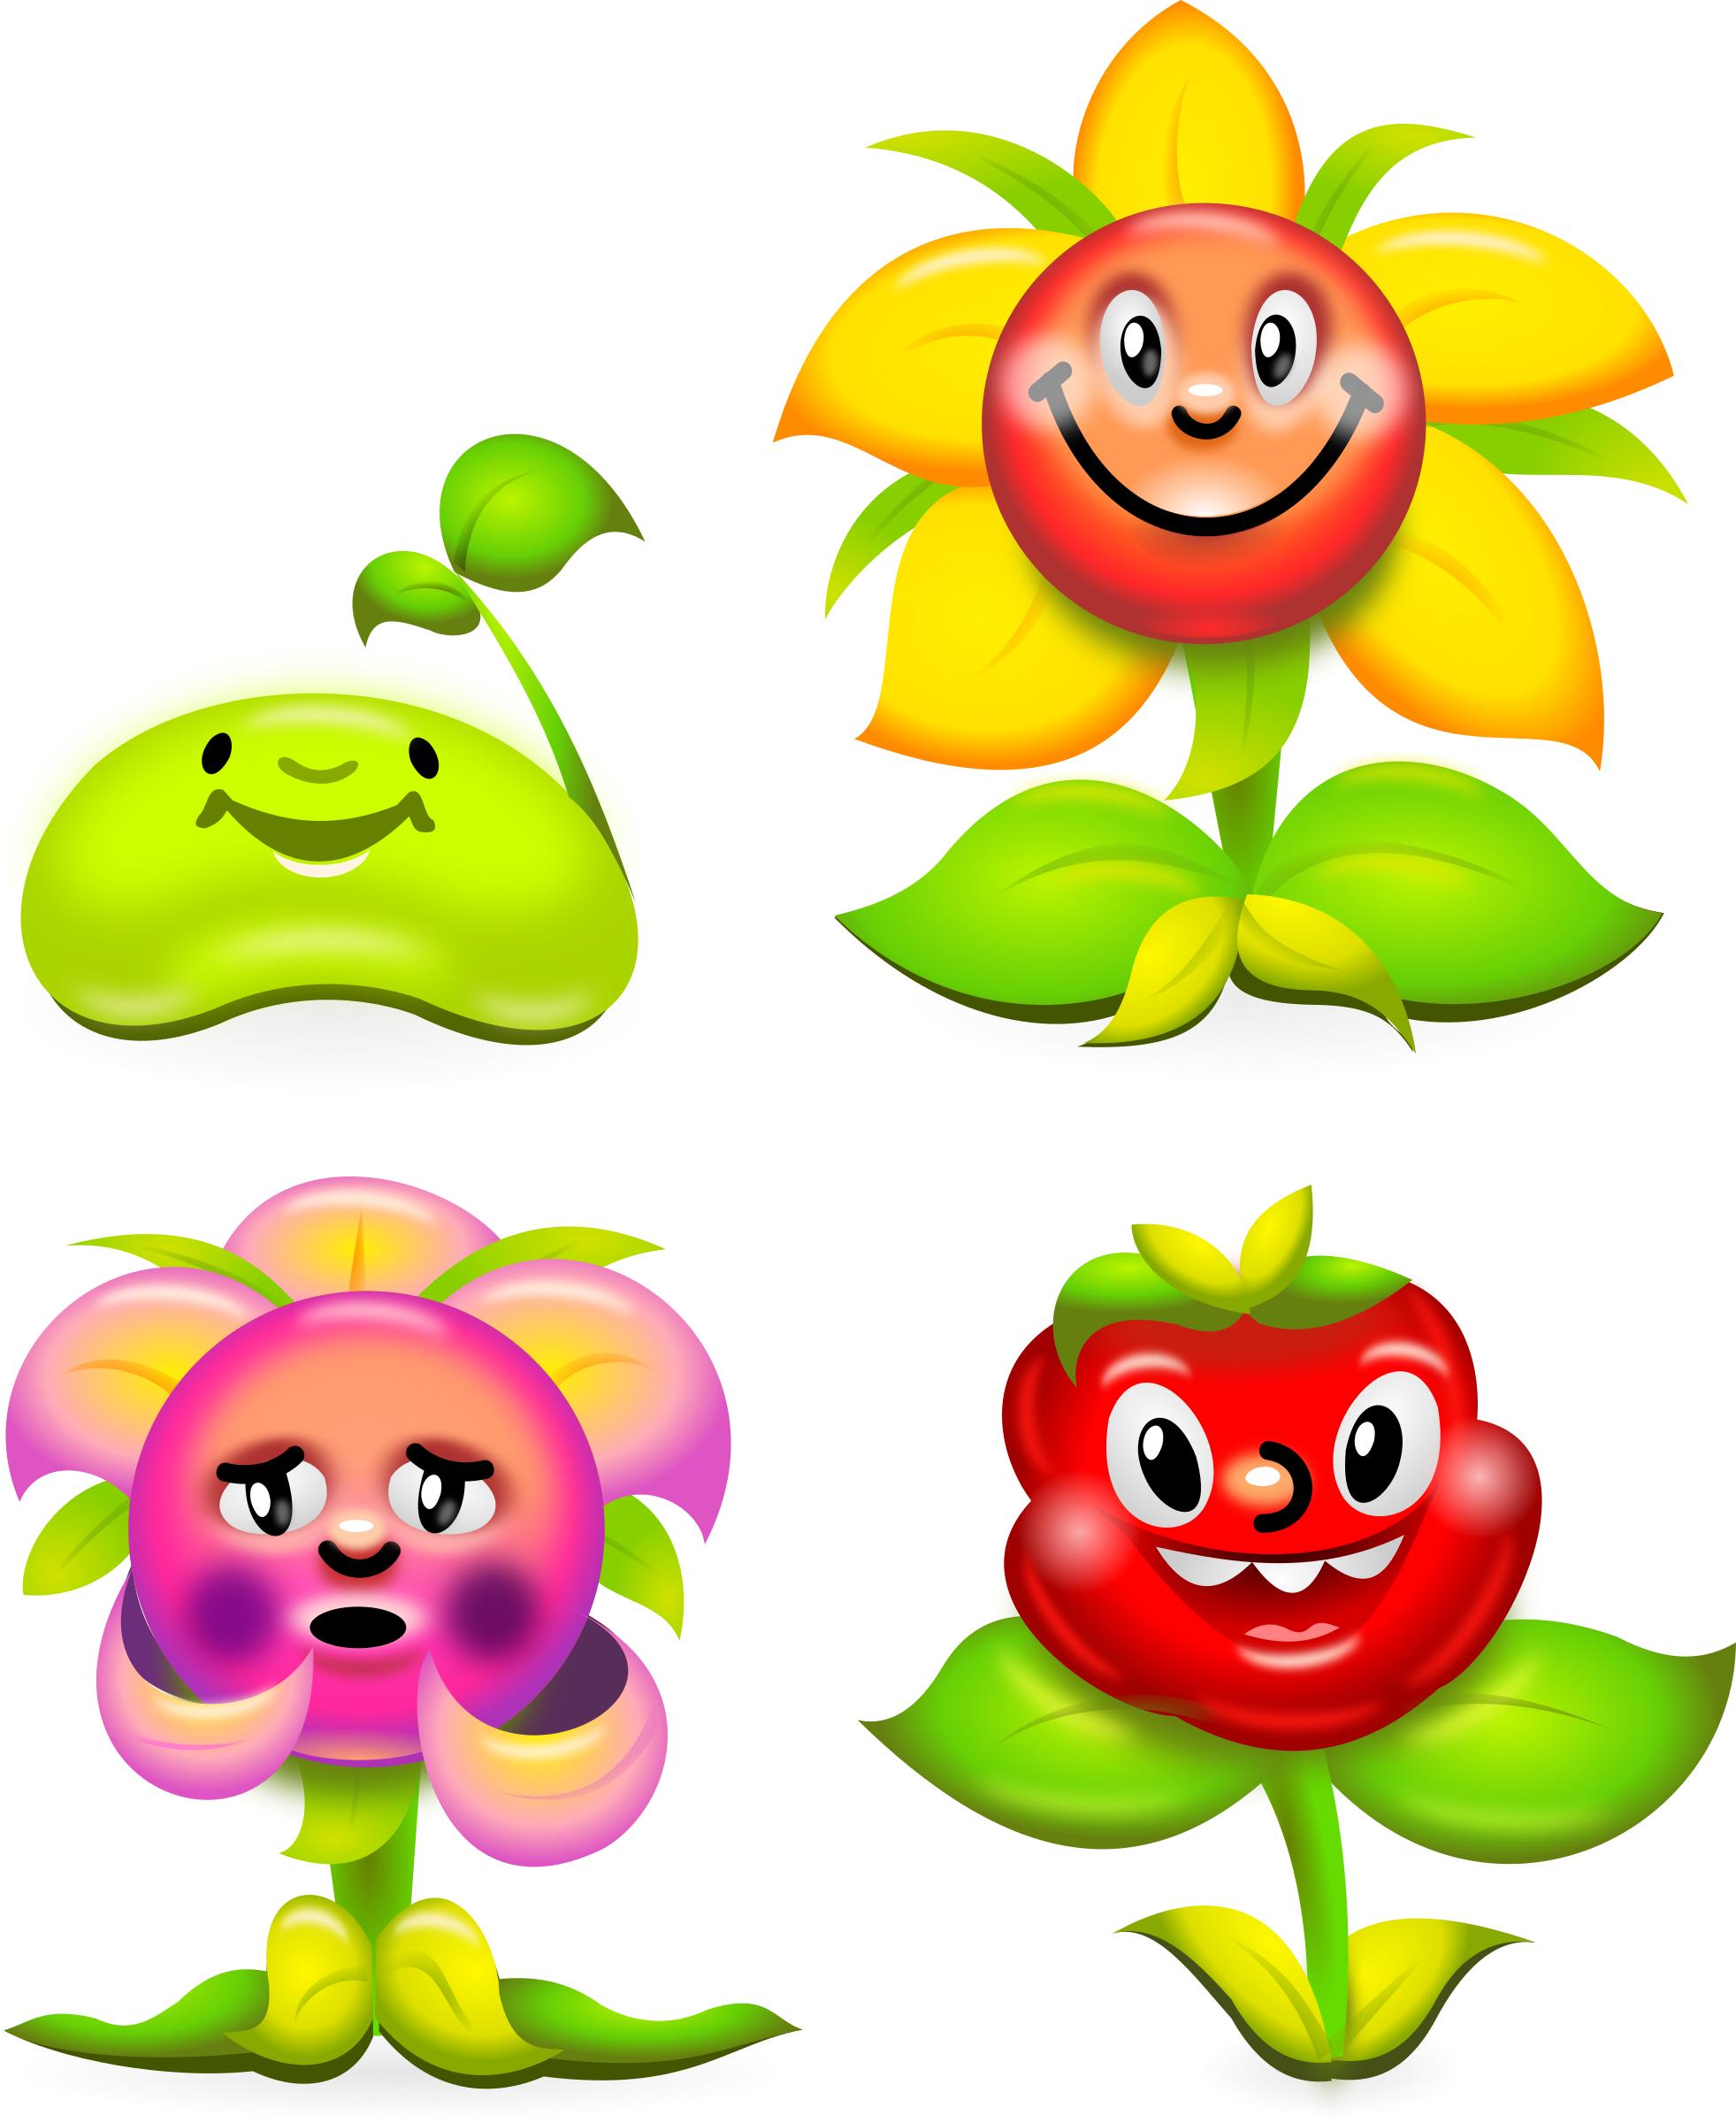 Flower Game Characters - superb production quality png